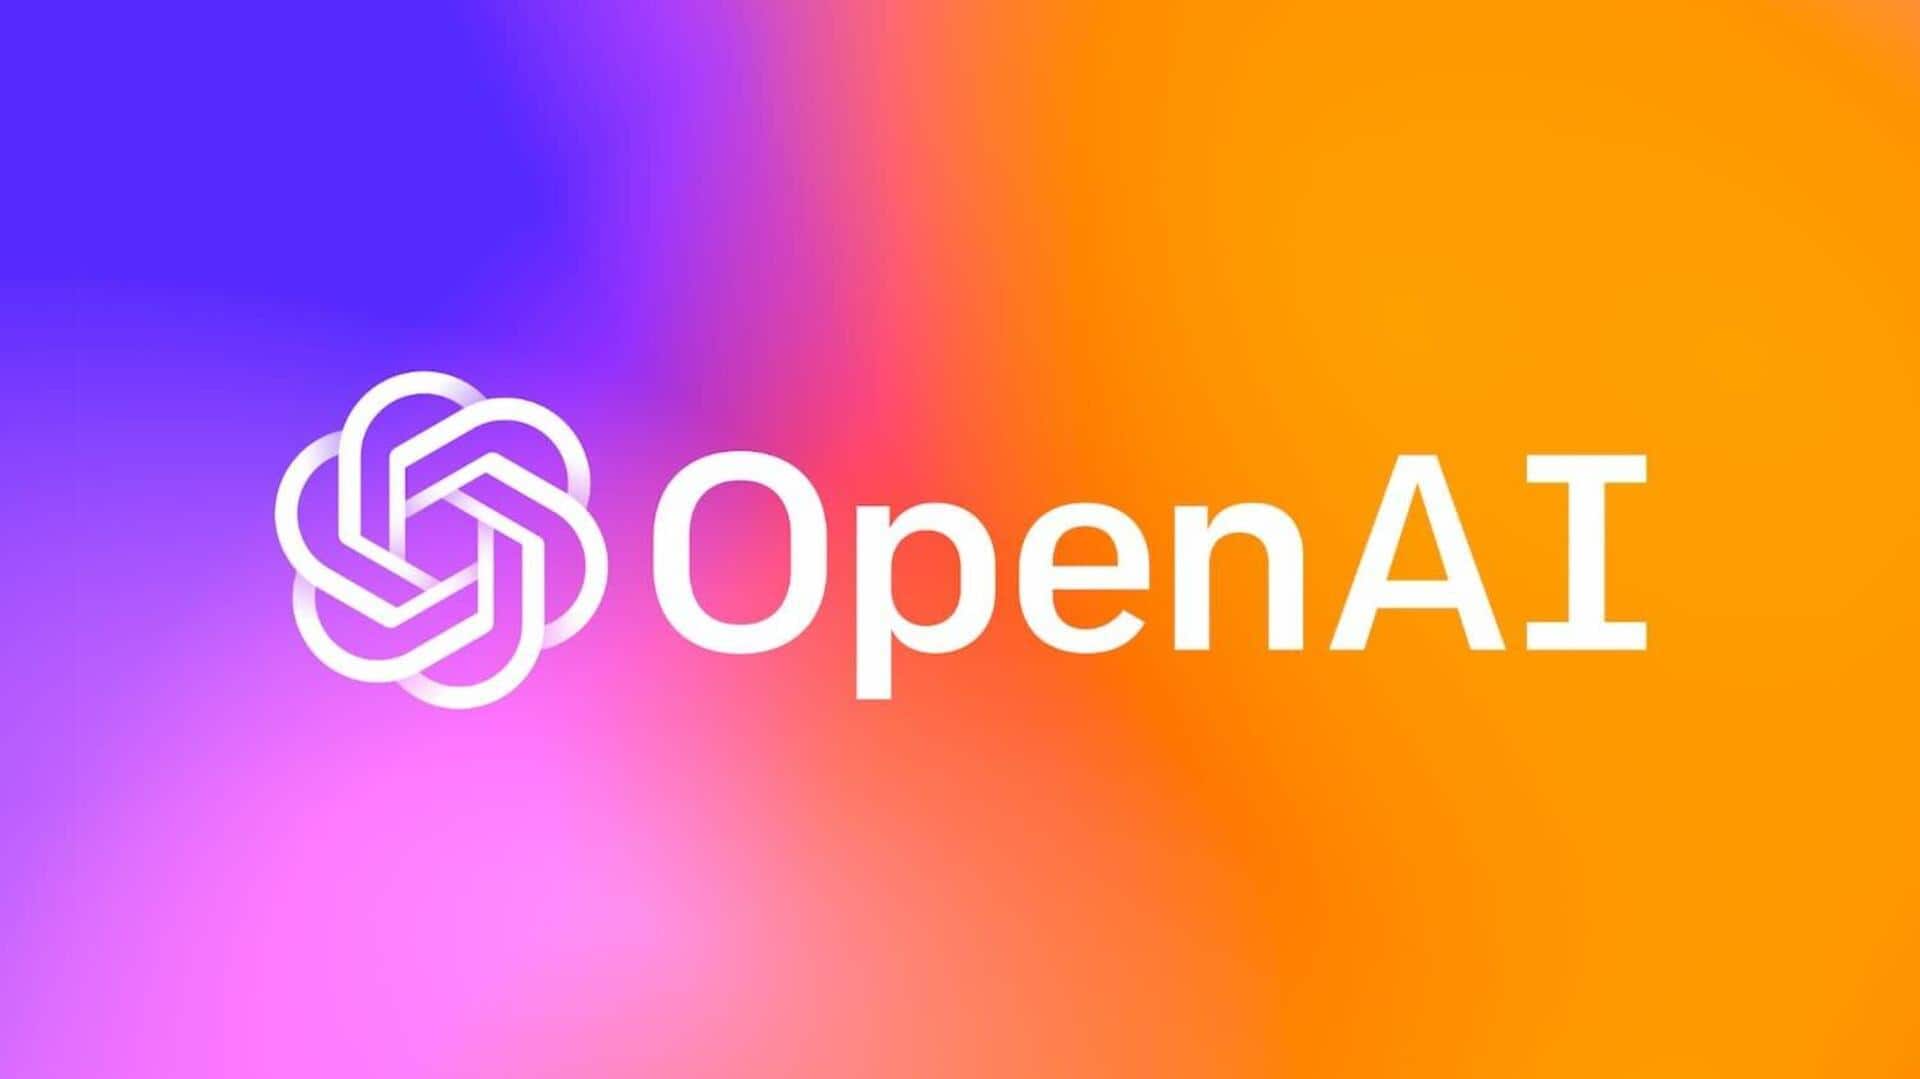 OpenAI severs ties with two researchers amid confidentiality issues